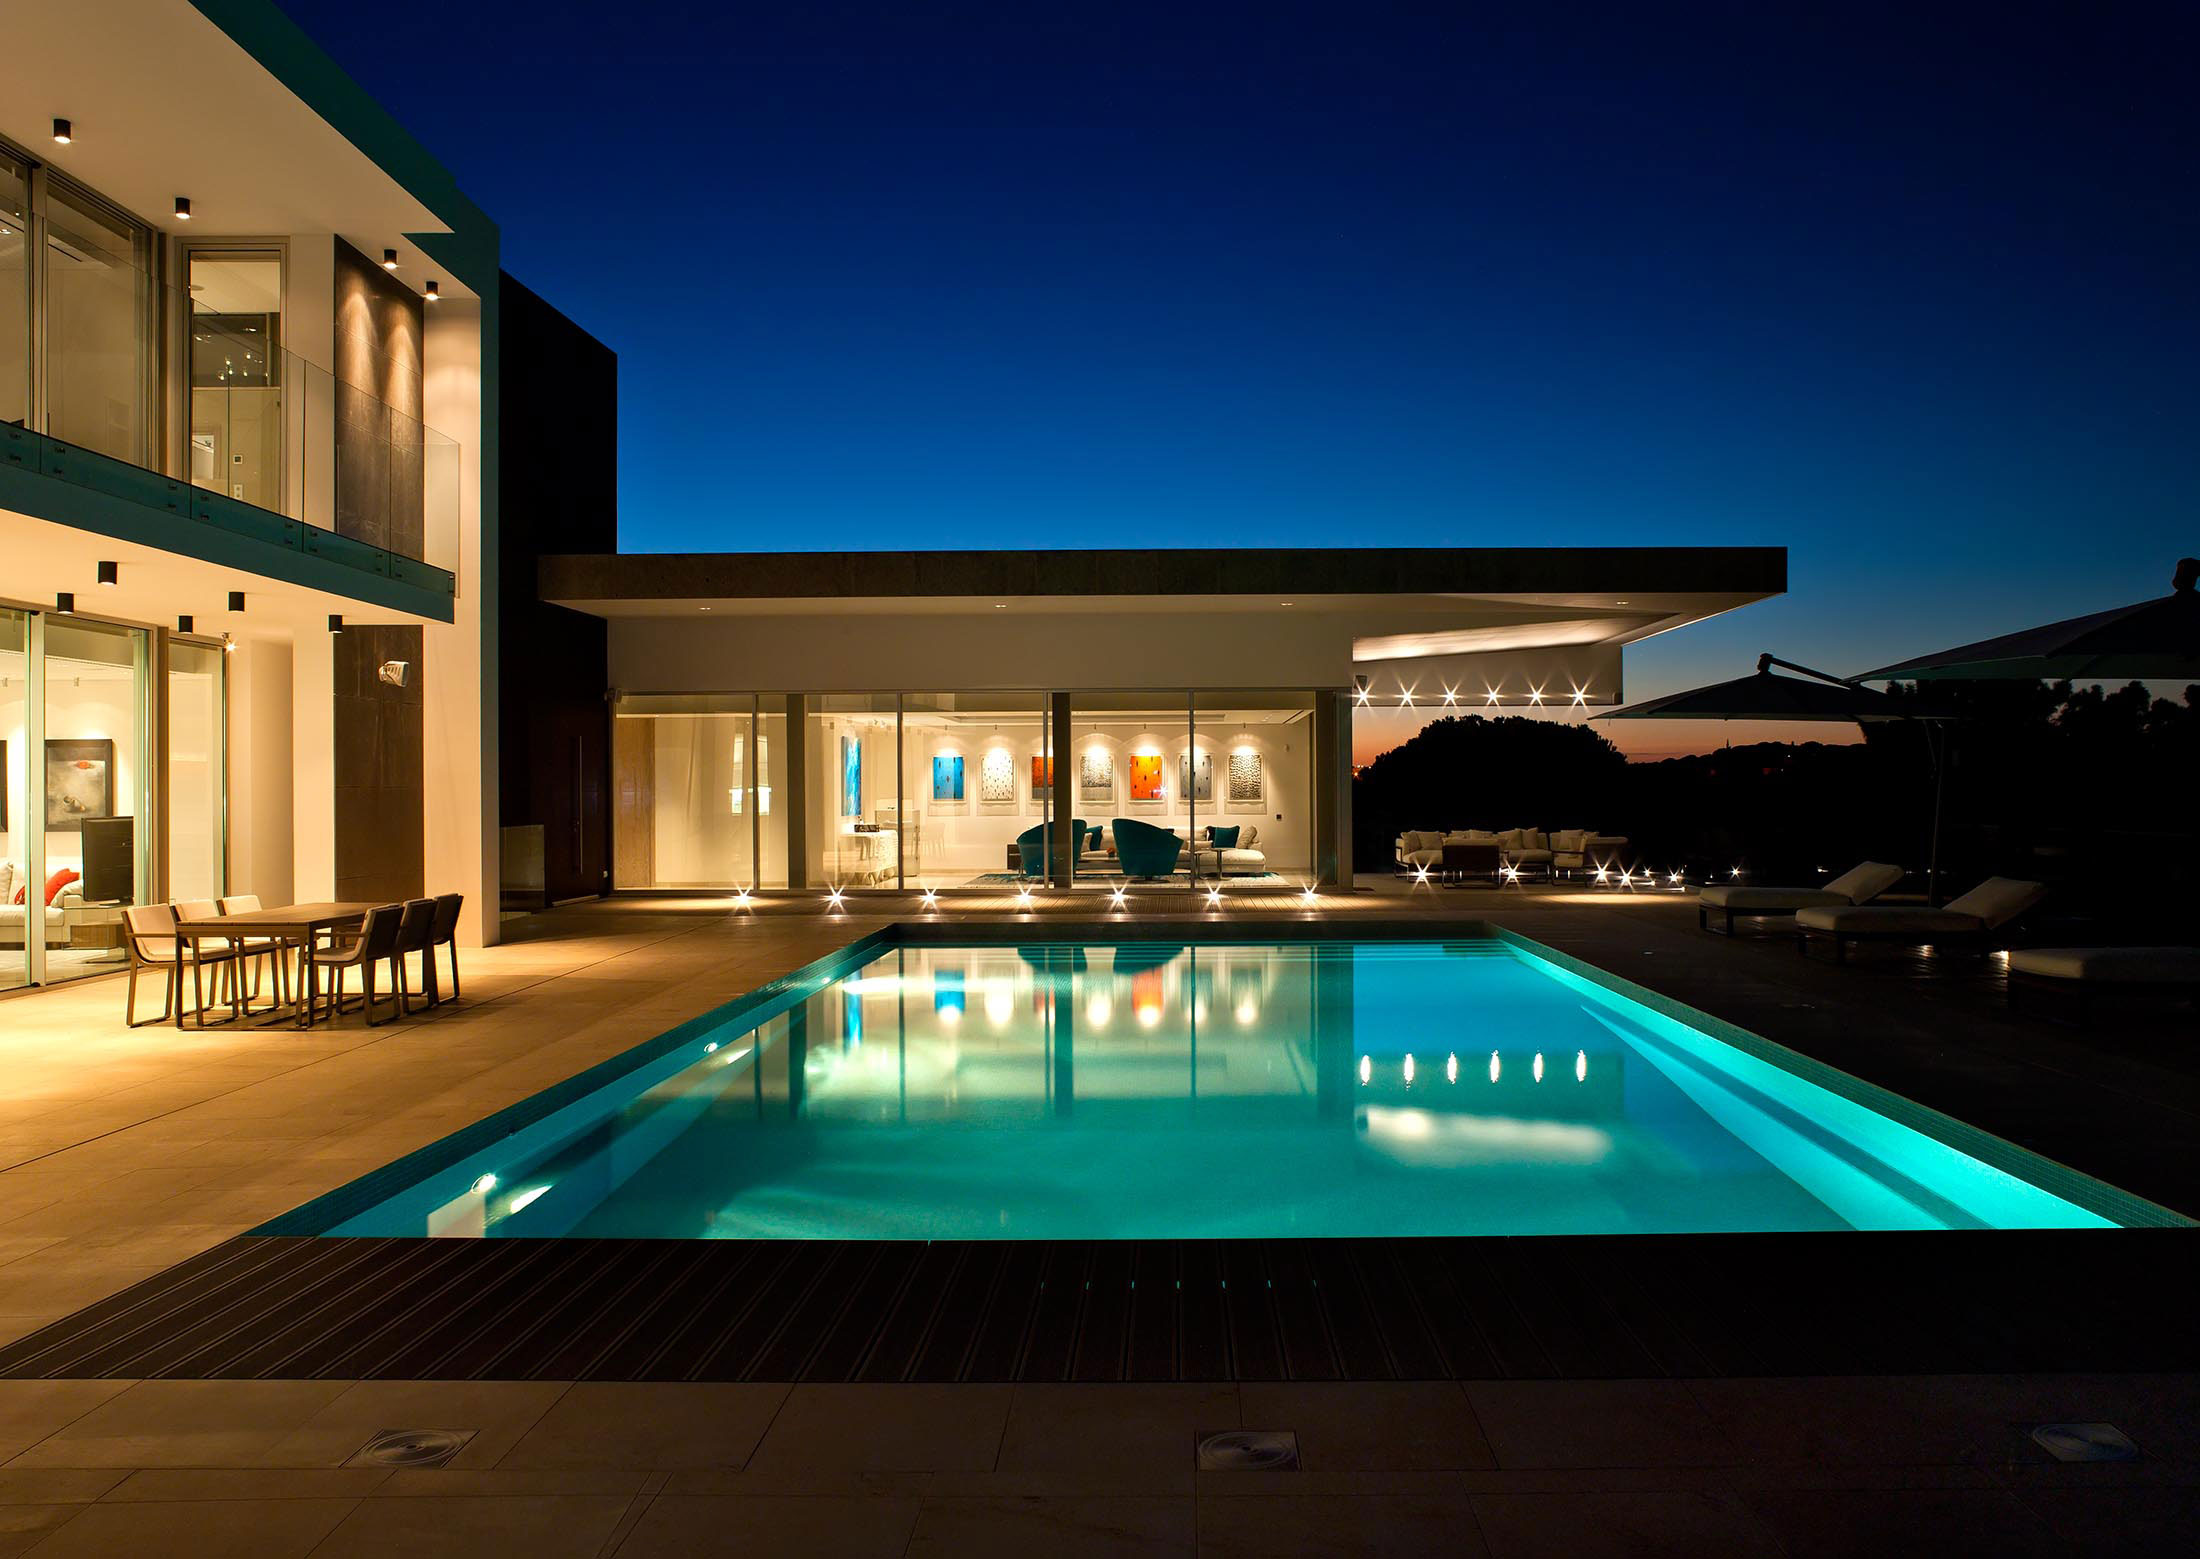 Pool Lighting, Family House in Portugal